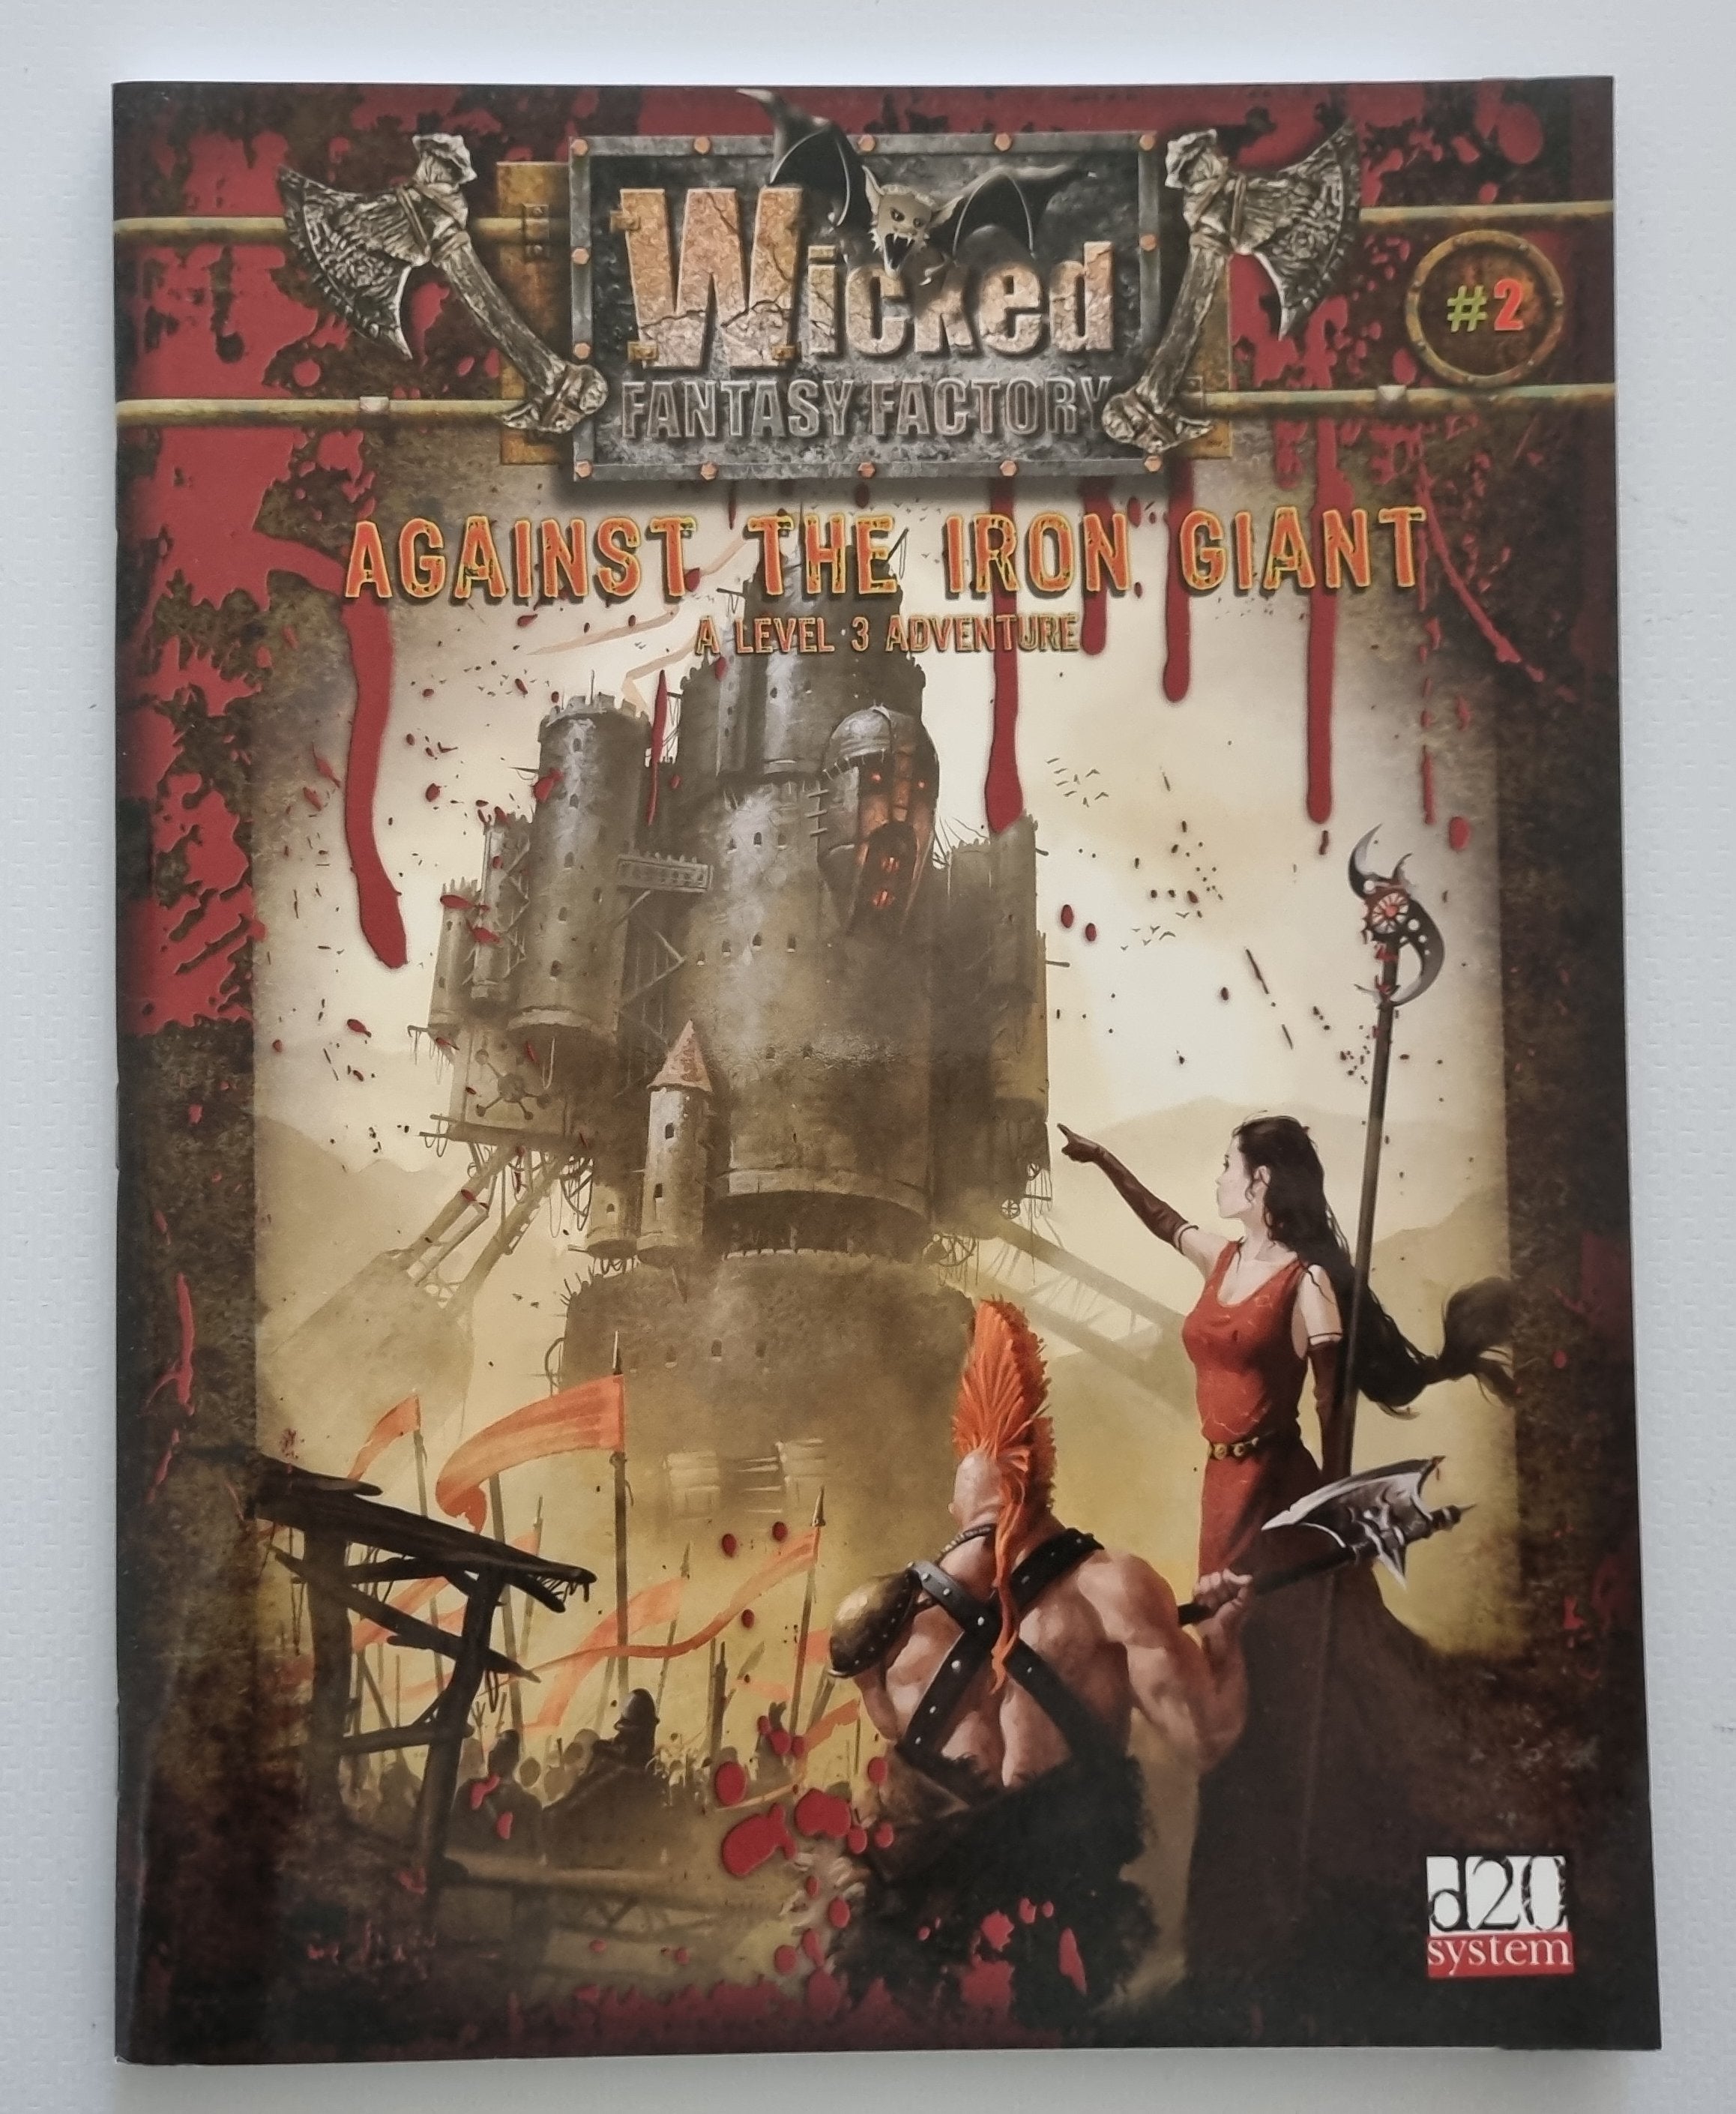 Against the Iron Giant - Wicked Fantasy Factory (D20 System)